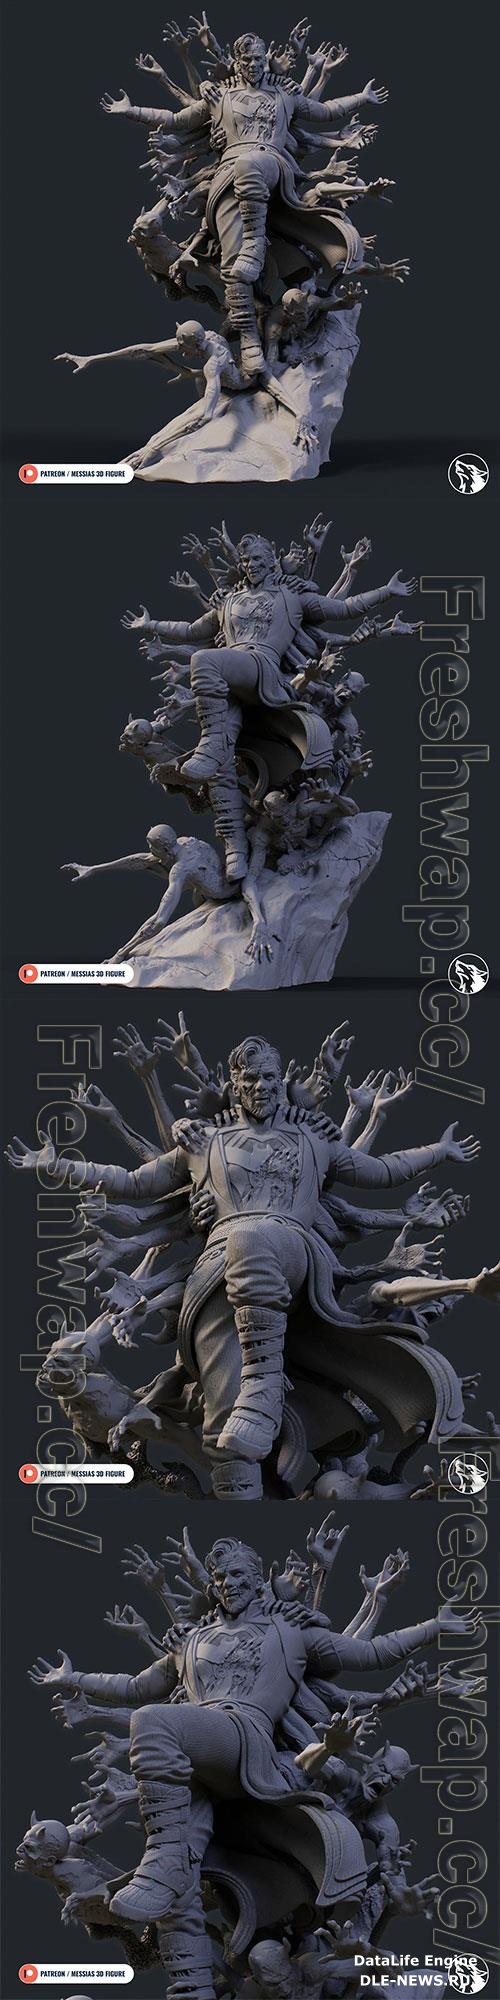 3D Print Doctor Strange in the Multiverse of Madness